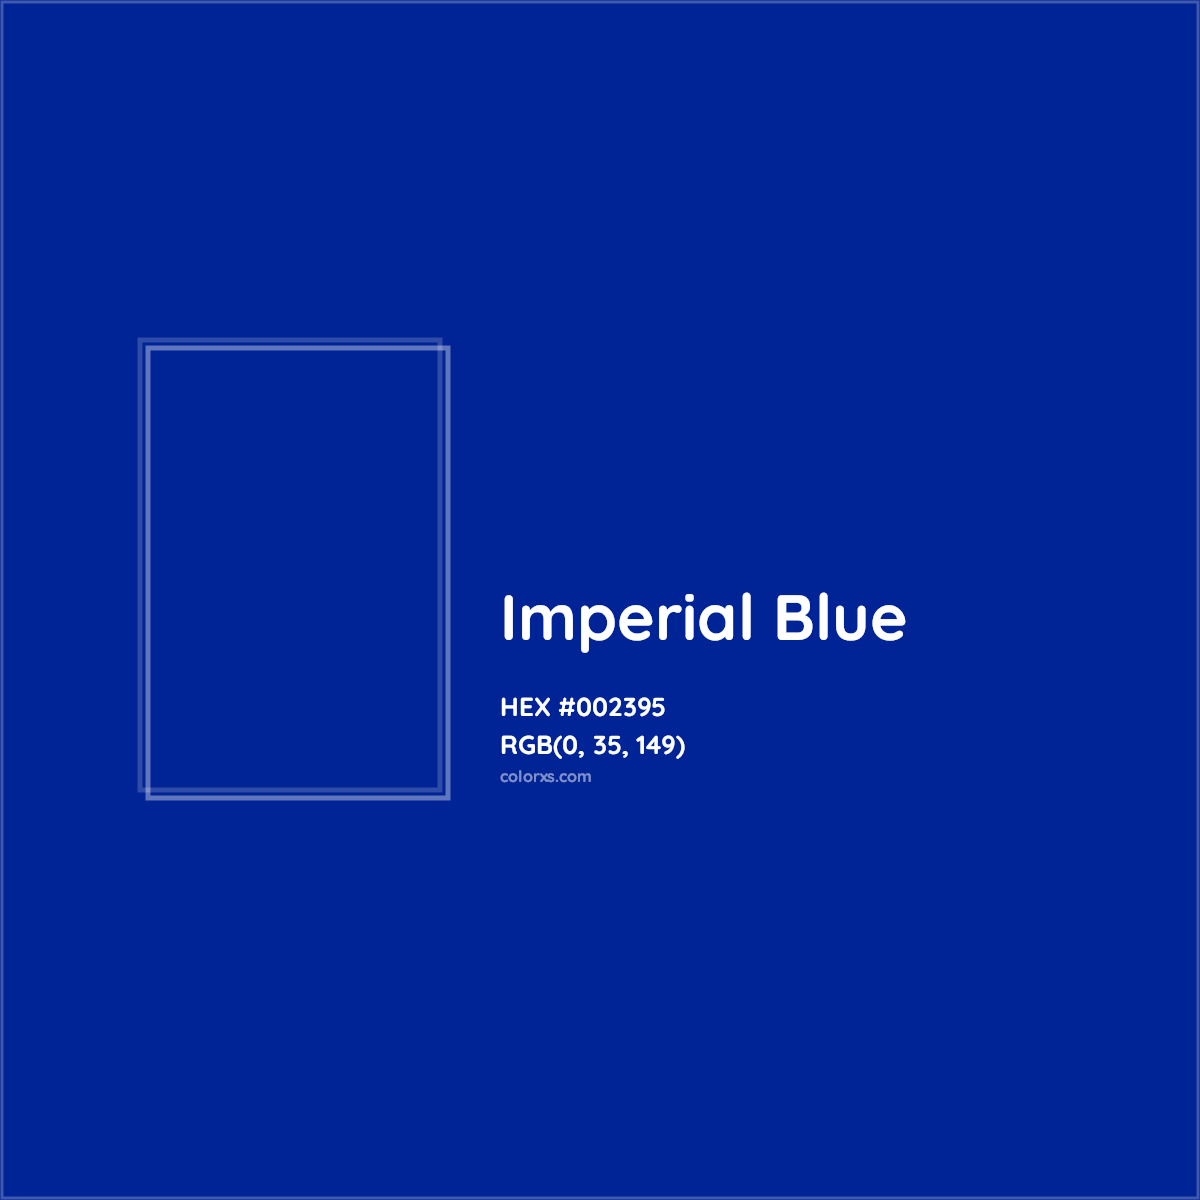 HEX #002395 Imperial Blue Color - Color Code